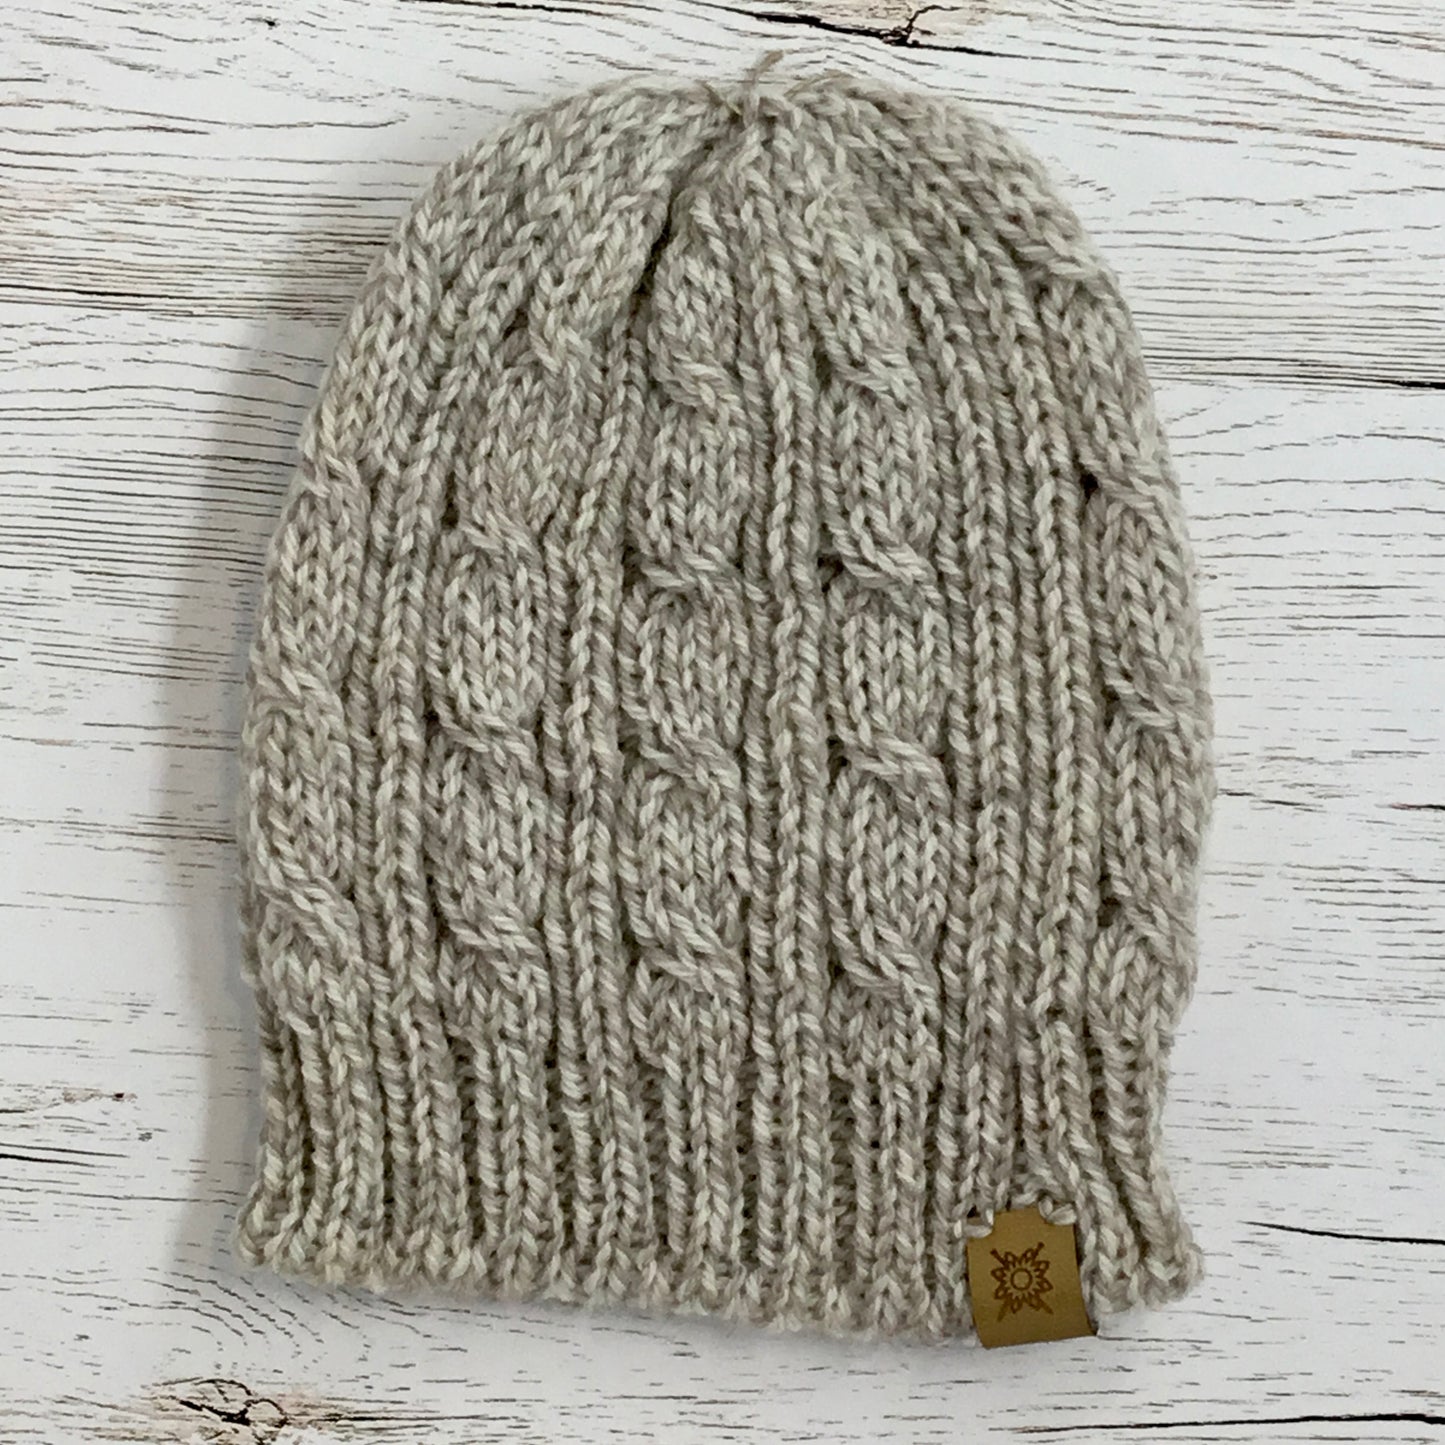 Adult Handknitted Cable Hat, Light Grey/Ivory, Small